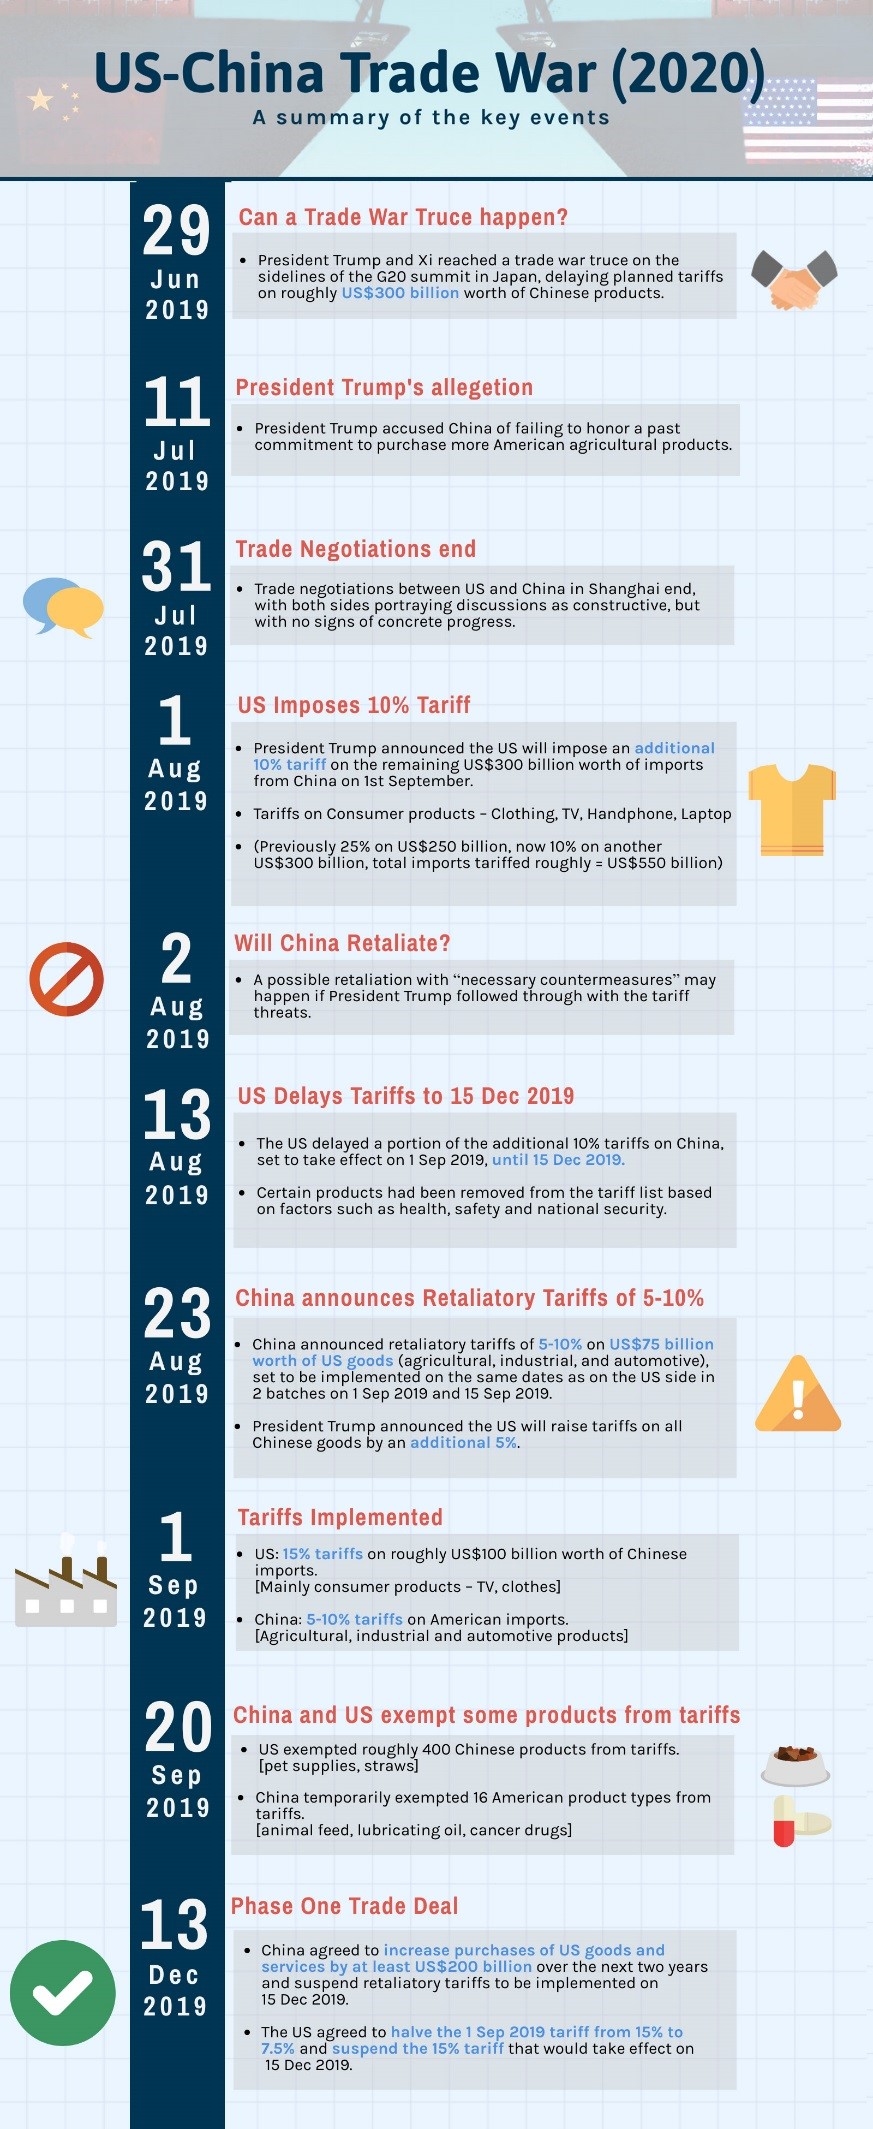 US-China Trade War Timeline: A New Hope?